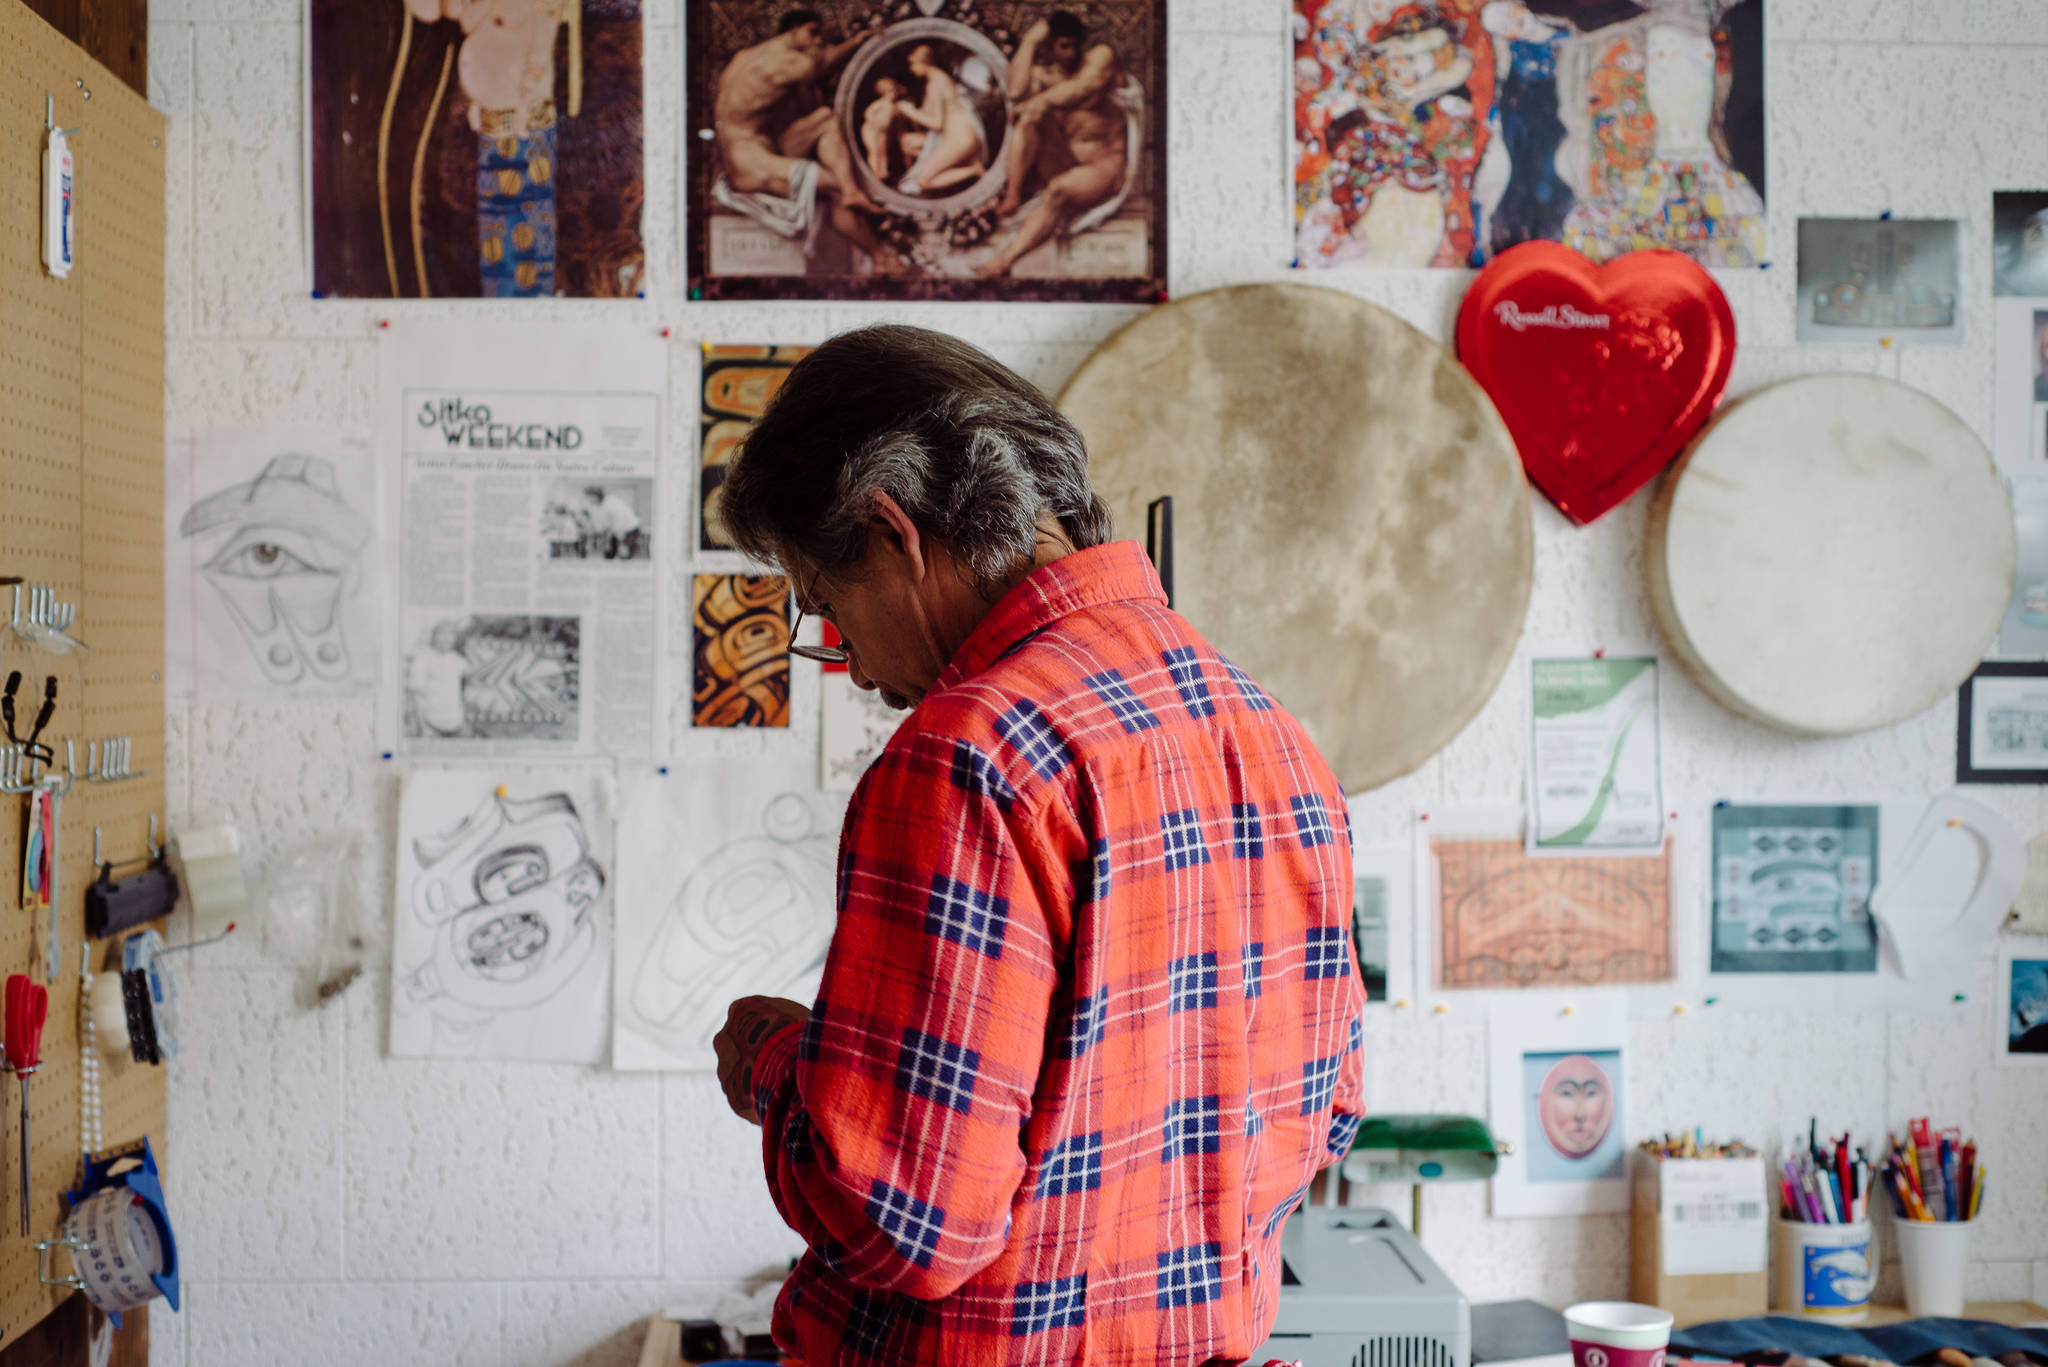 Robert Hoffman in his studio. (Photo by Sarah O’Leary)